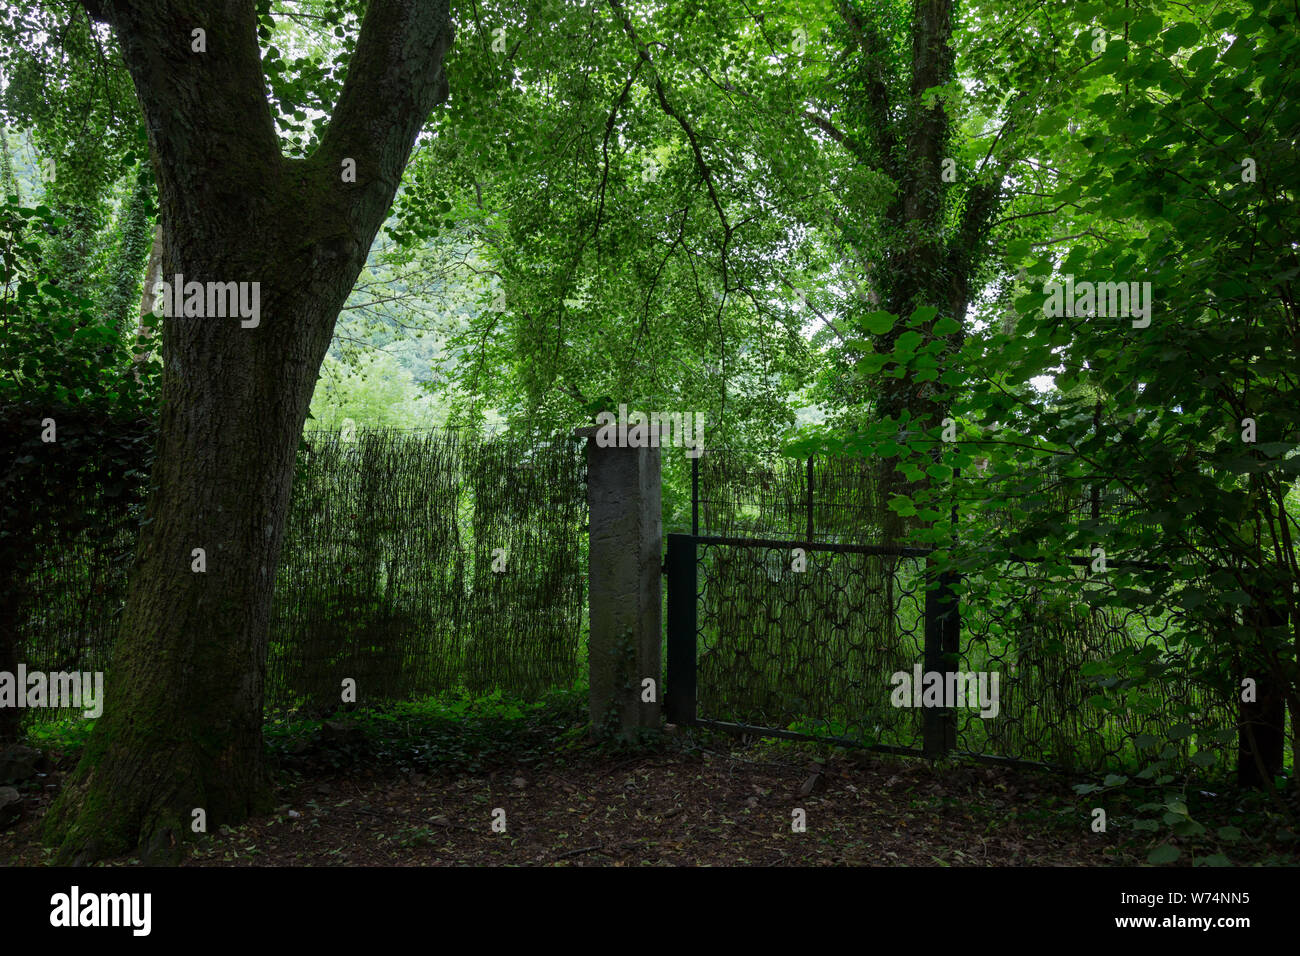 A closed gate in a secluded area of an Alsatian forest near Thann, France. Stock Photo